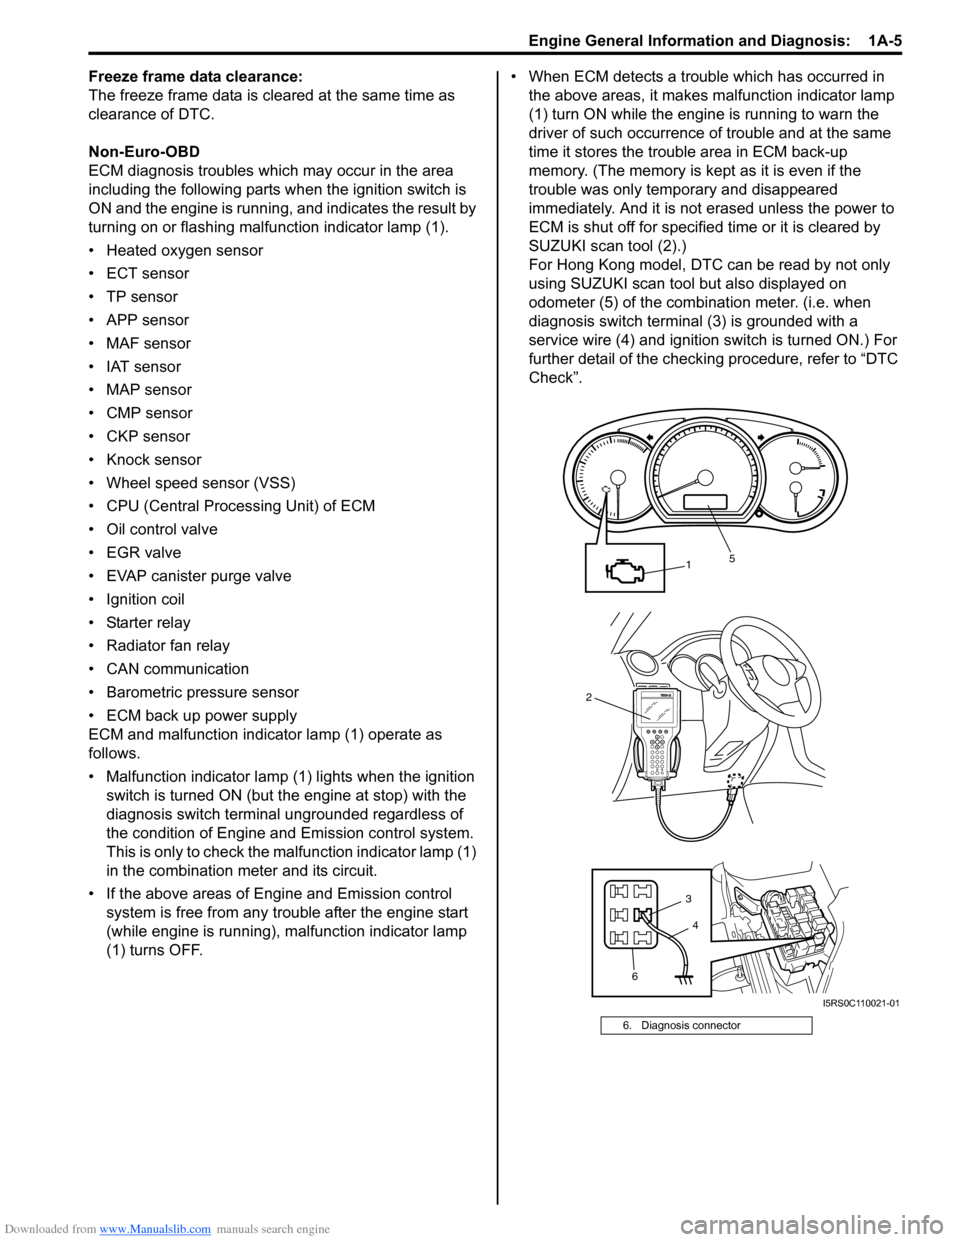 SUZUKI SWIFT 2006 2.G Service Workshop Manual Downloaded from www.Manualslib.com manuals search engine Engine General Information and Diagnosis:  1A-5
Freeze frame data clearance:
The freeze frame data is cleared at the same time as 
clearance of